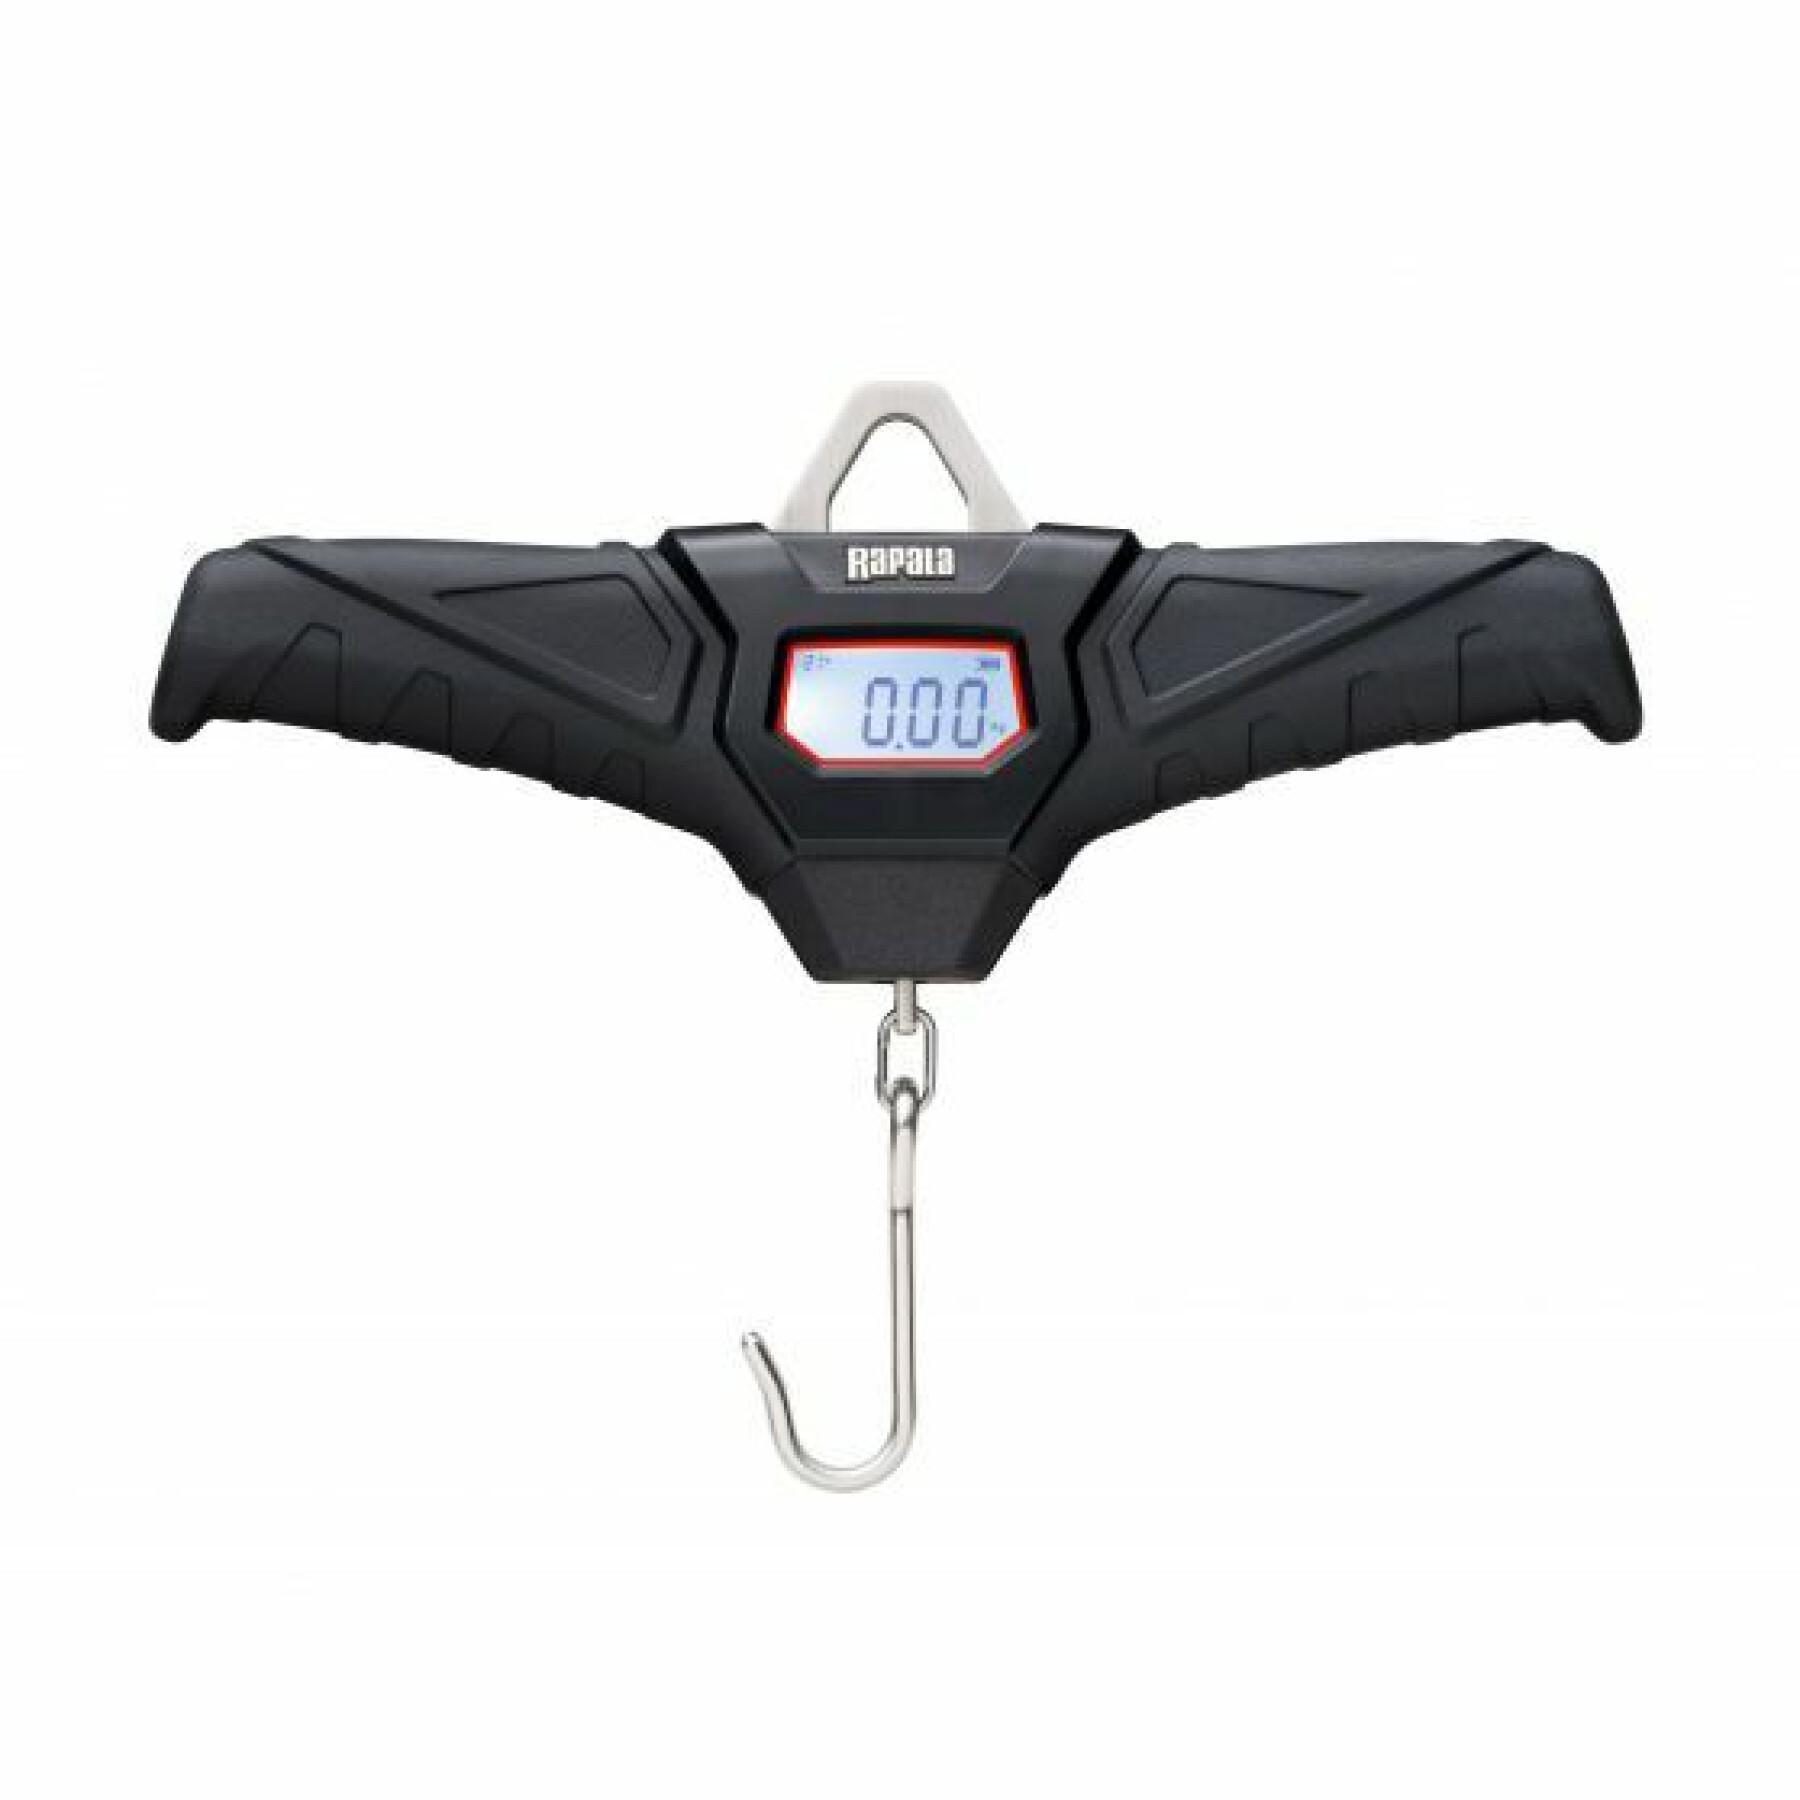 Schaal Rapala rcd magnum 50kg scale